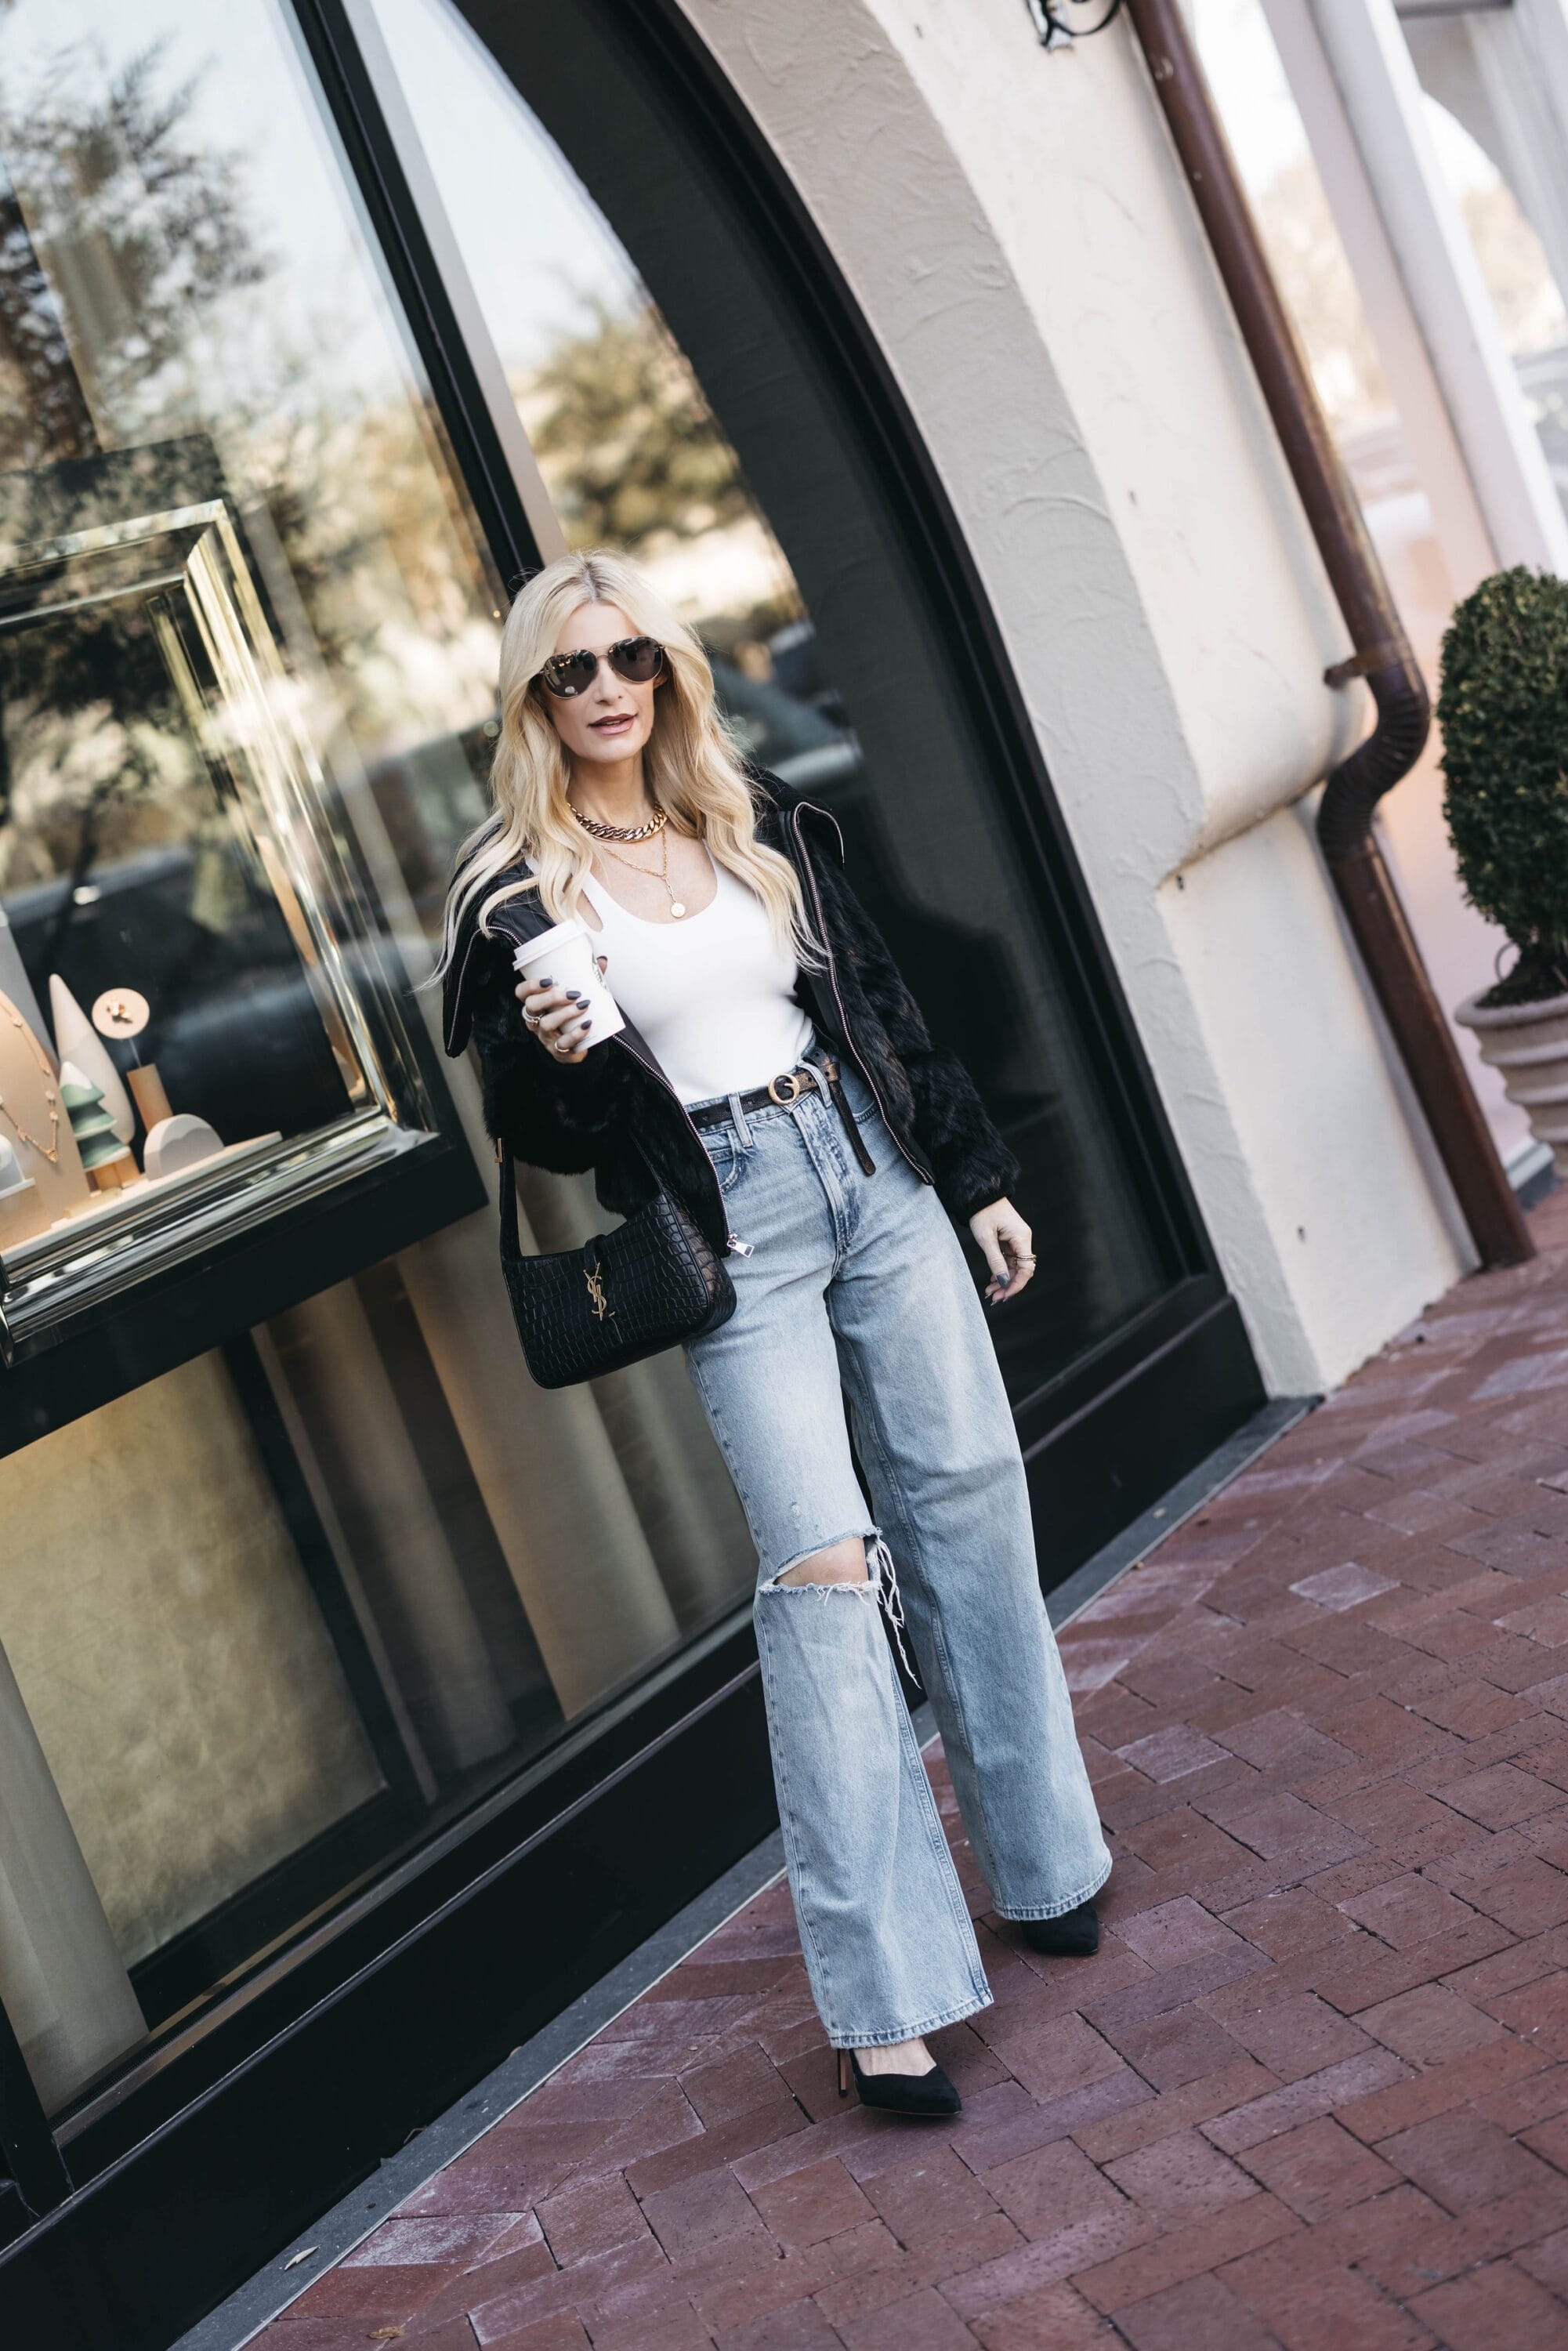 Over 40 fashion blogger wearing wide leg jeans instead of baggy low waisted jeans that are one of the worst fashion trends of 2023 for women over 40.